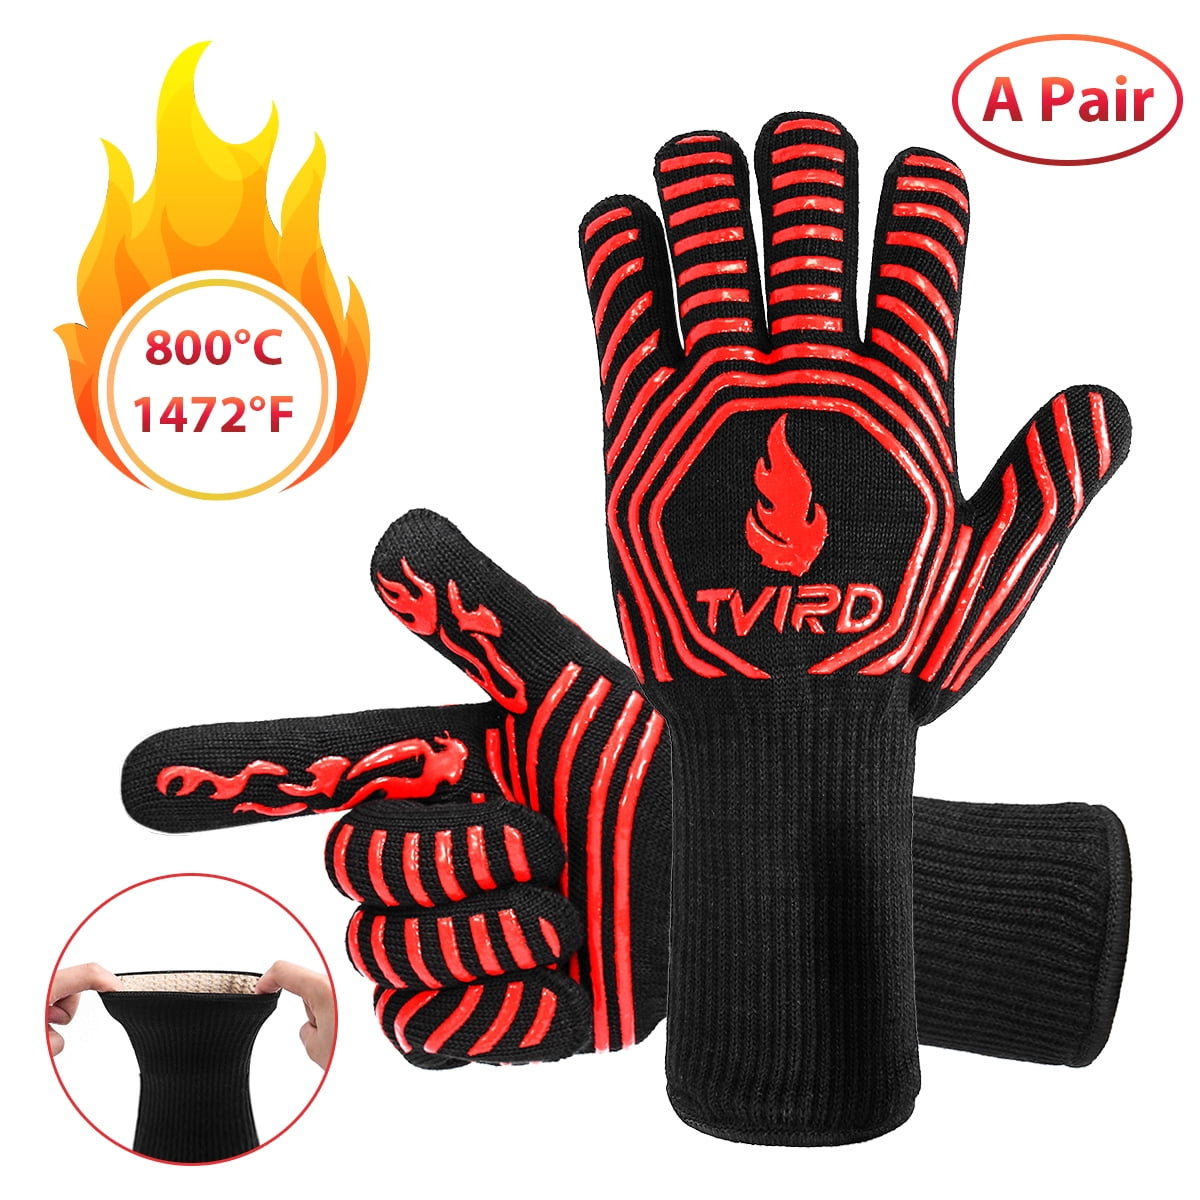 1 PAIR Cooking Oven Gloves Silicone Grill BBQ Mitts 1472℉ Extreme Heat Resistant 